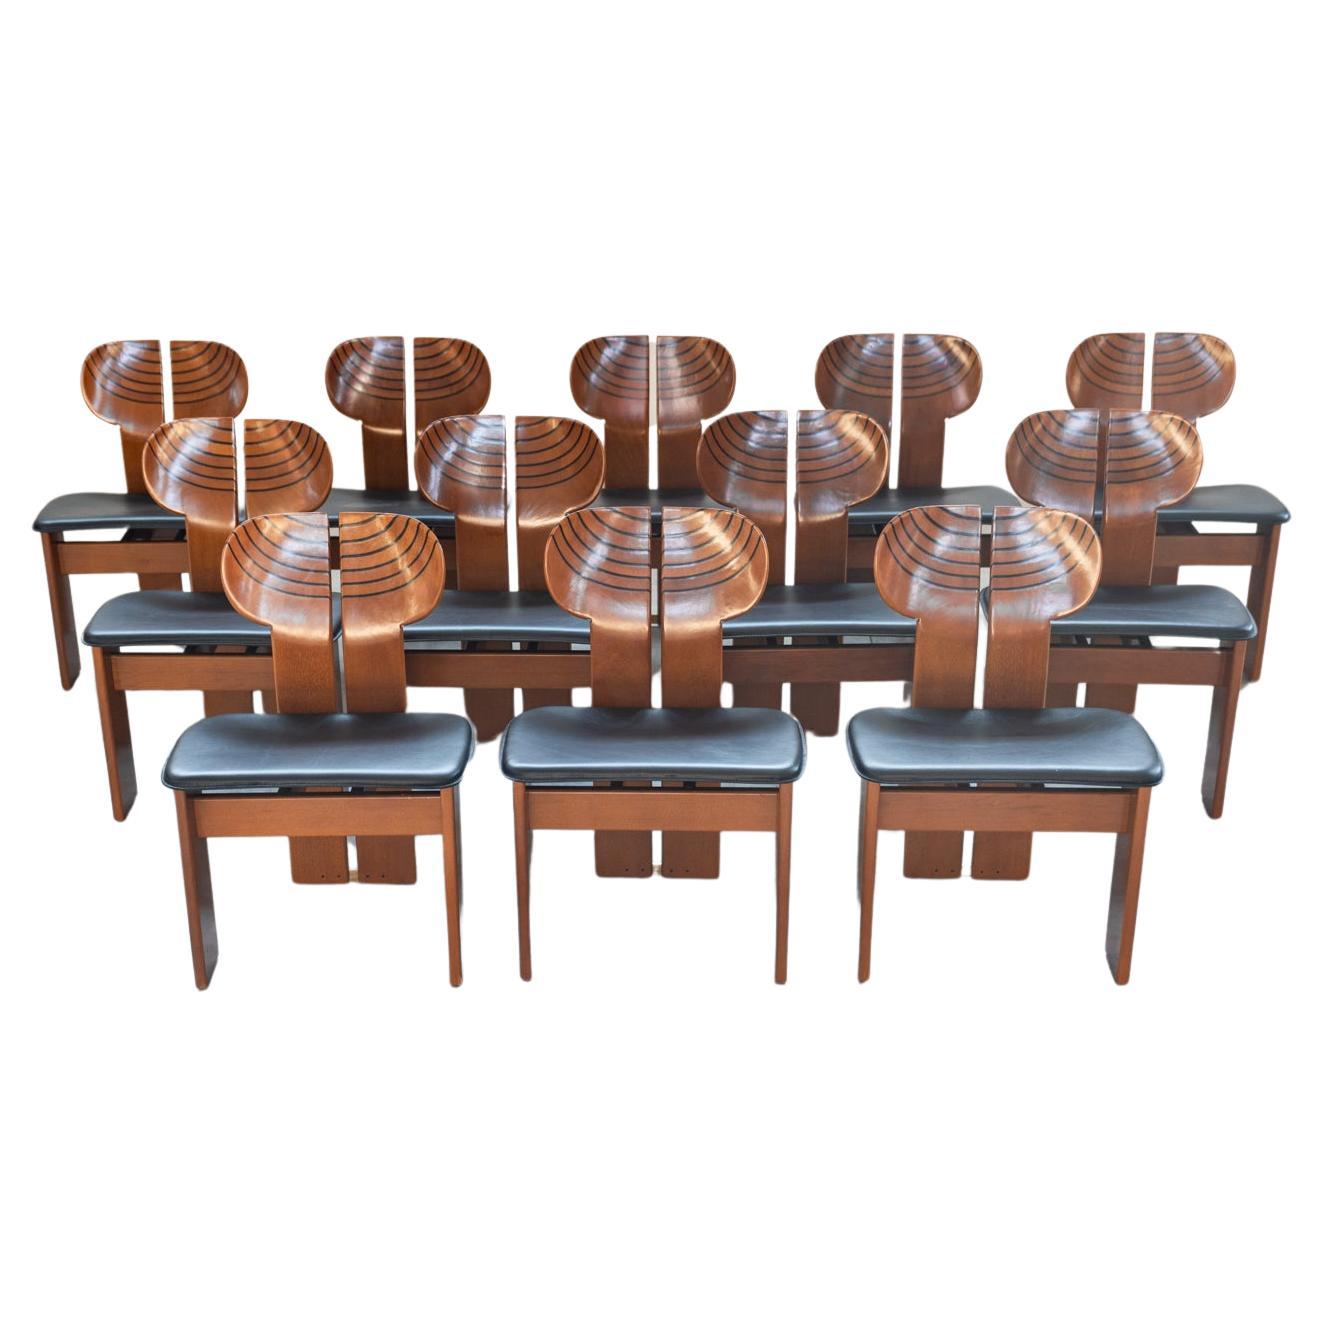 Set 12 chairs Afra & Tobia Scarpa mod. Africa - Gruppo Unico, 80/90 For Sale